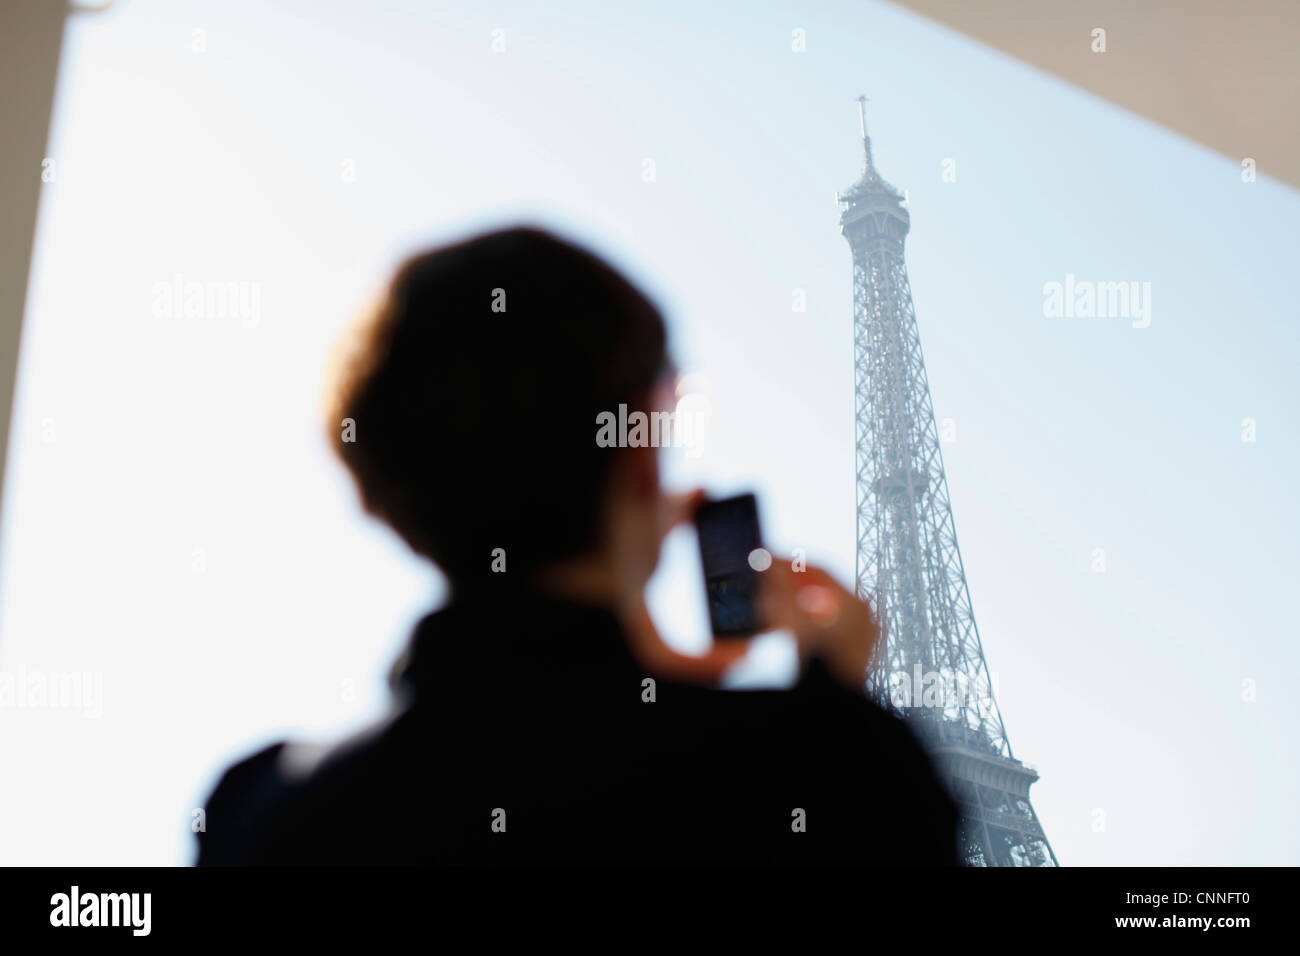 Woman taking picture of Eiffel Tower Stock Photo